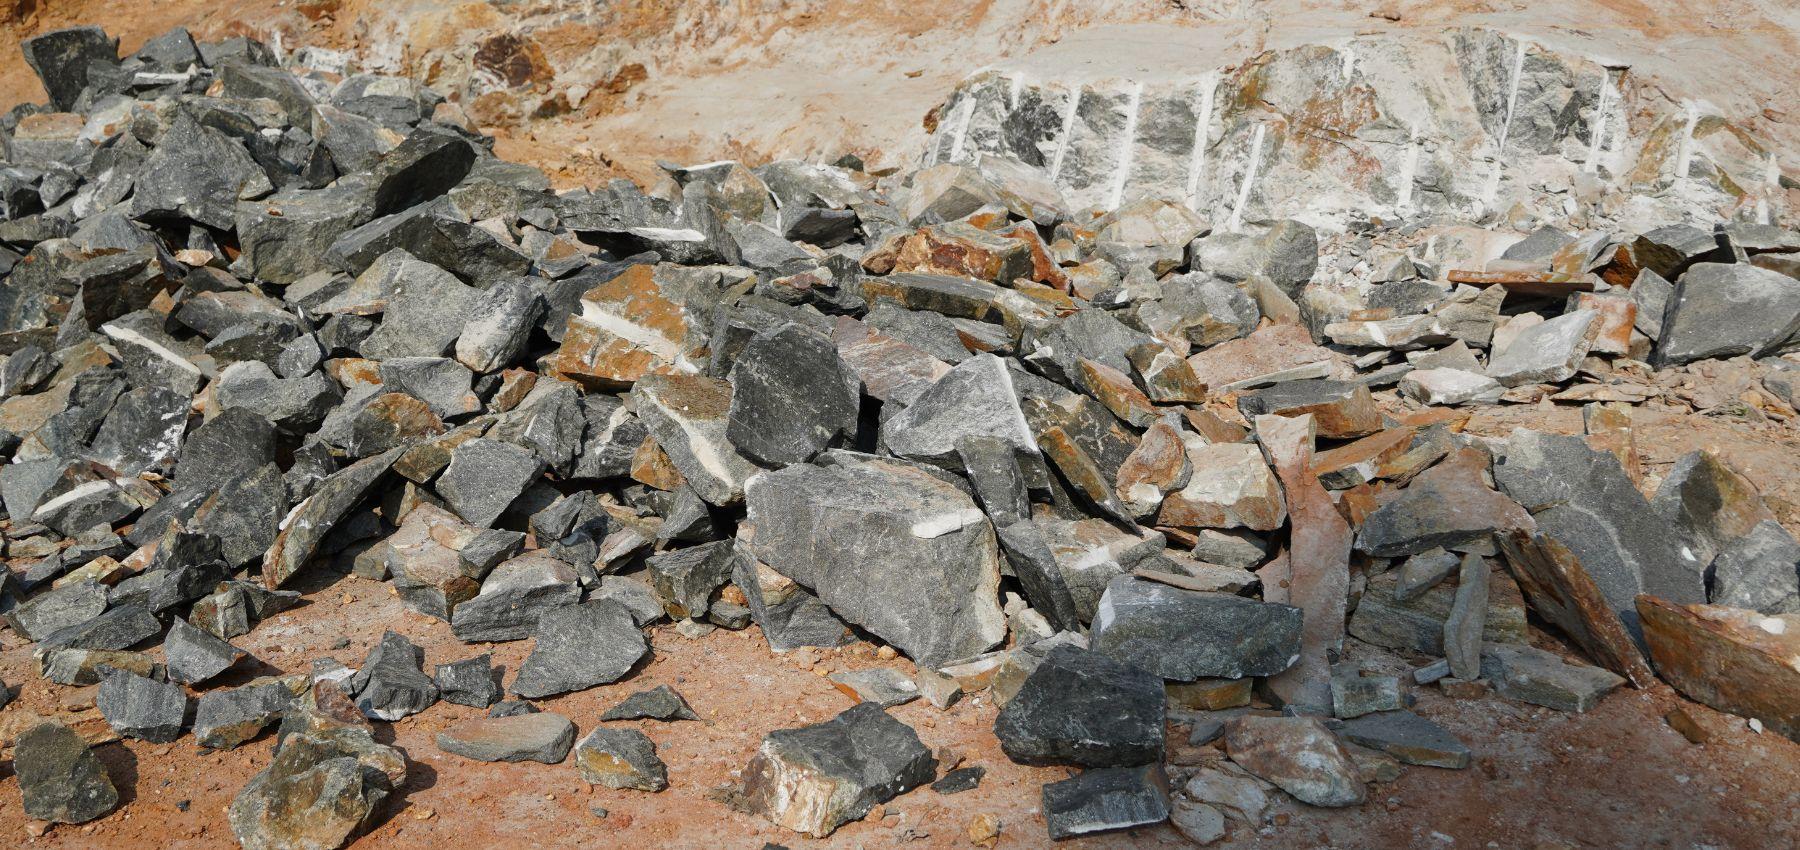 A pile of grey and brown coloured zeolite rocks on the ground after excavation